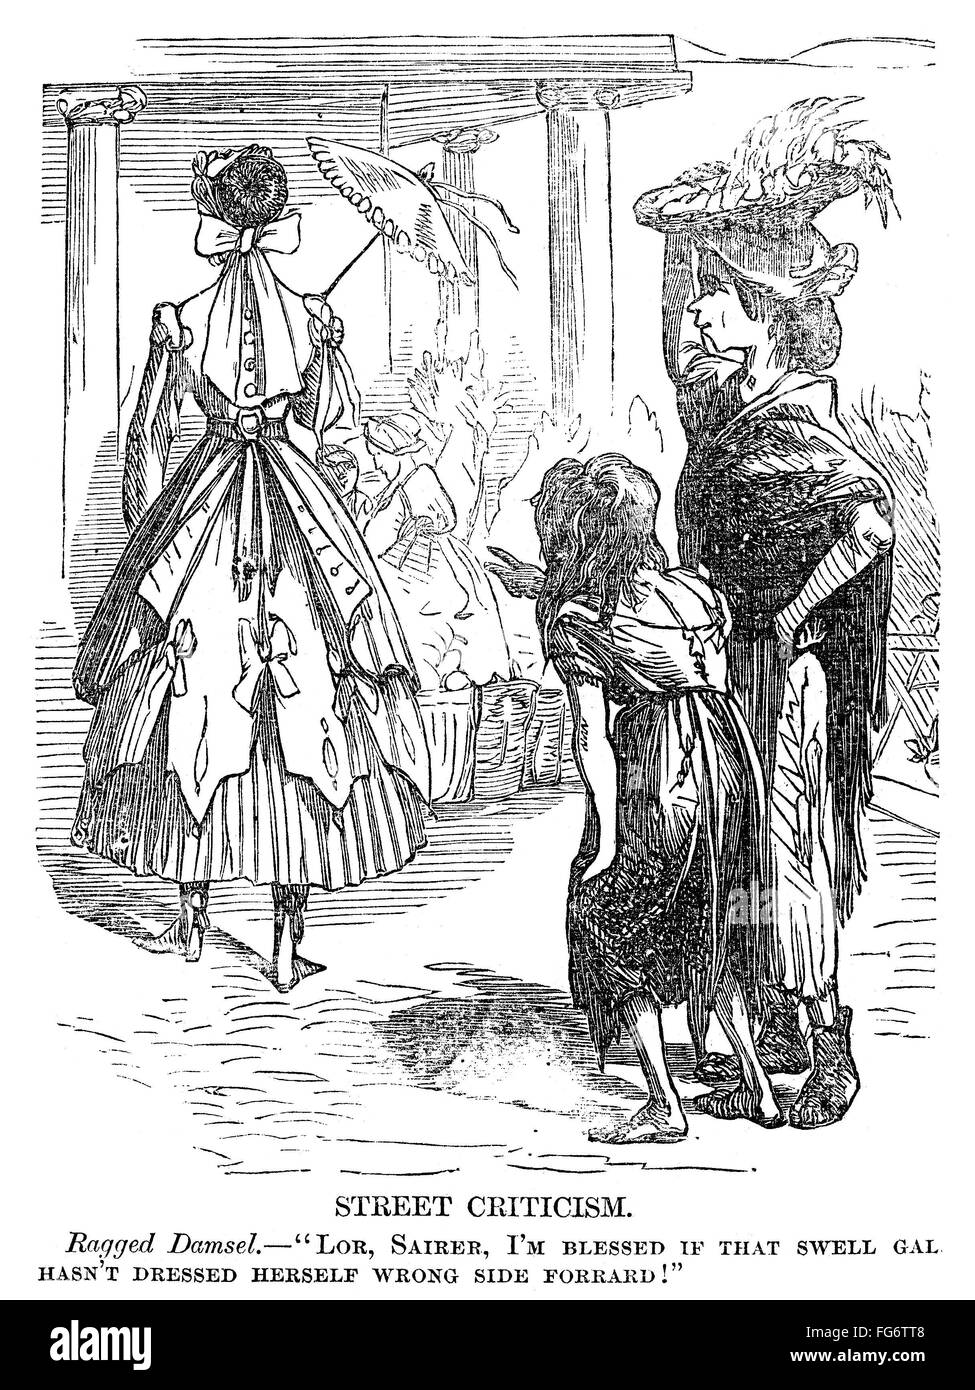 CARTOON: FASHION, 1867. /n'Street Criticism. Ragged damsel: 'Lor, Sairer, I'm blessed if that well gal hasn't dressed herself wrong side forrard!'' American, cartoon poking fun a women's fashion, 1867. Stock Photo